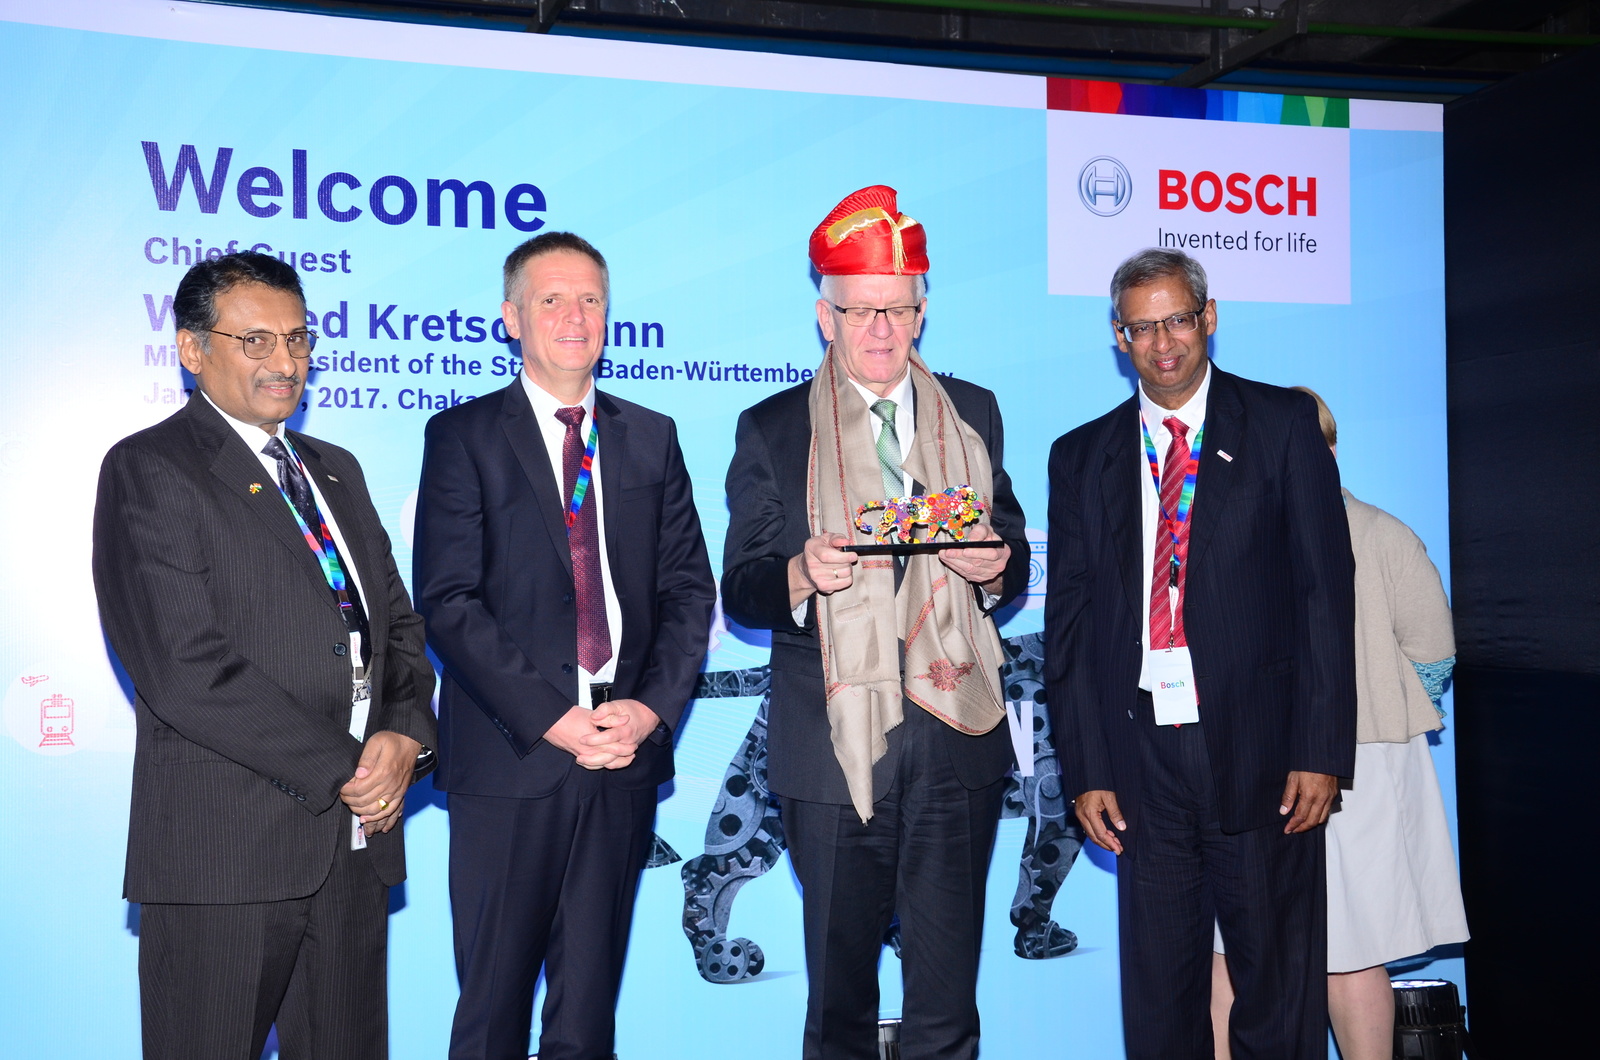 A distinguished guest: Minister-President Kretschmann visits Bosch in India